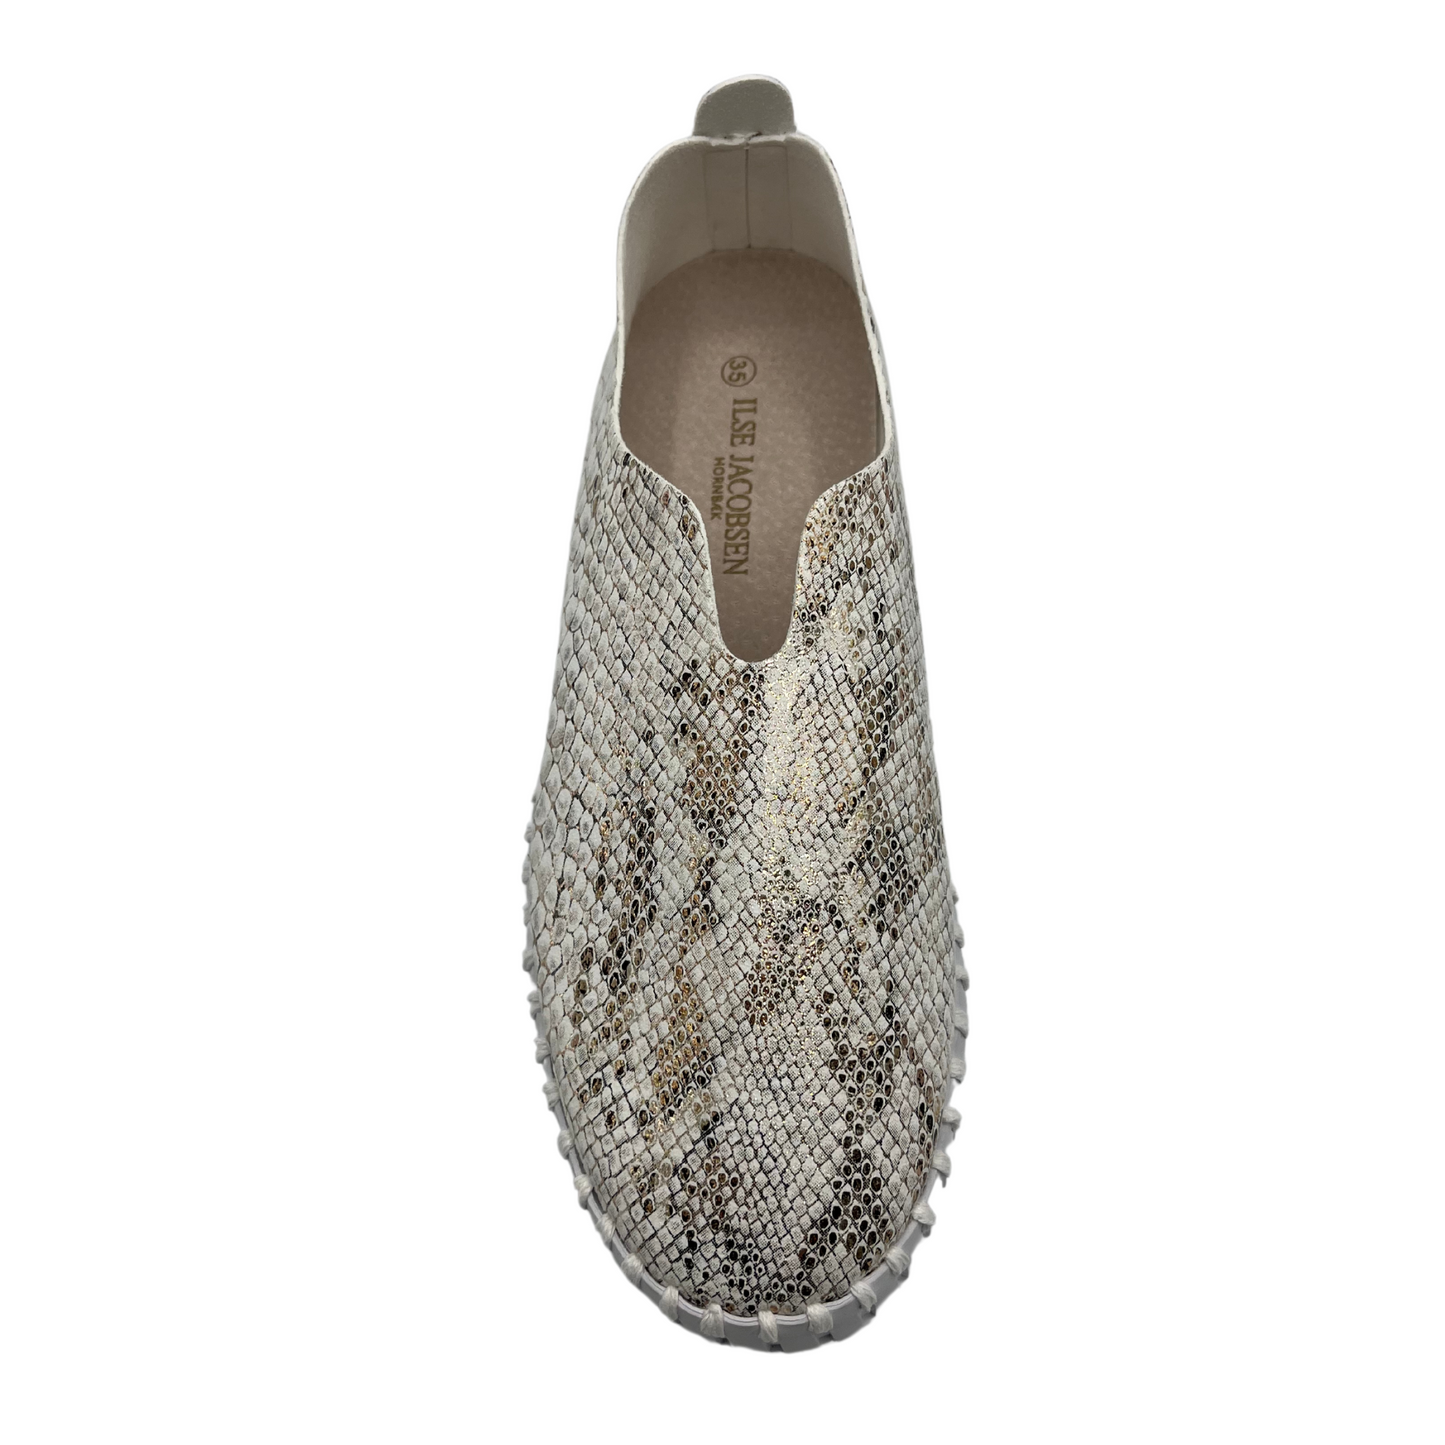 Top view of leather snake print sneaker with platform white rubber outsole